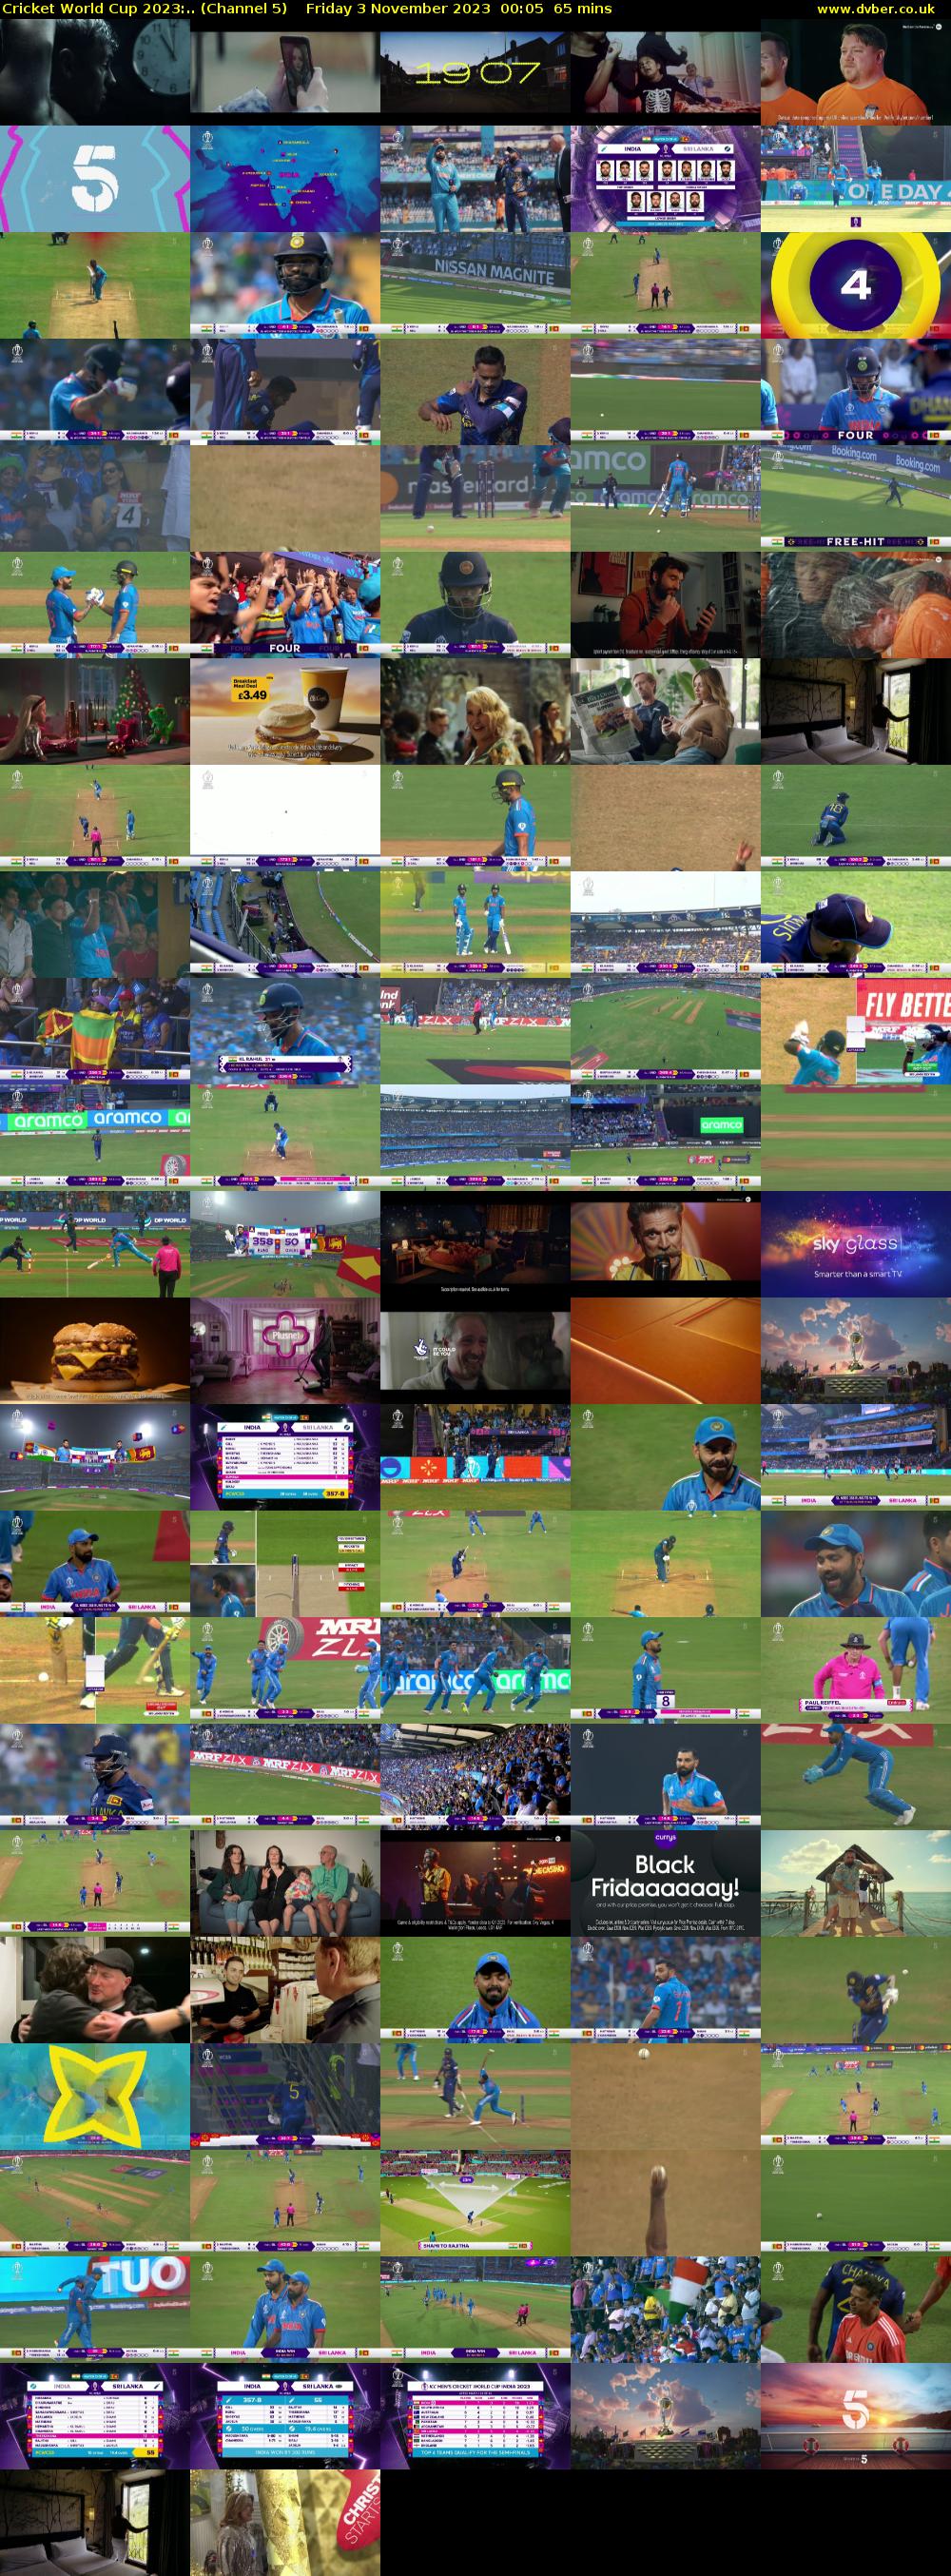 Cricket World Cup 2023:.. (Channel 5) Friday 3 November 2023 00:05 - 01:10